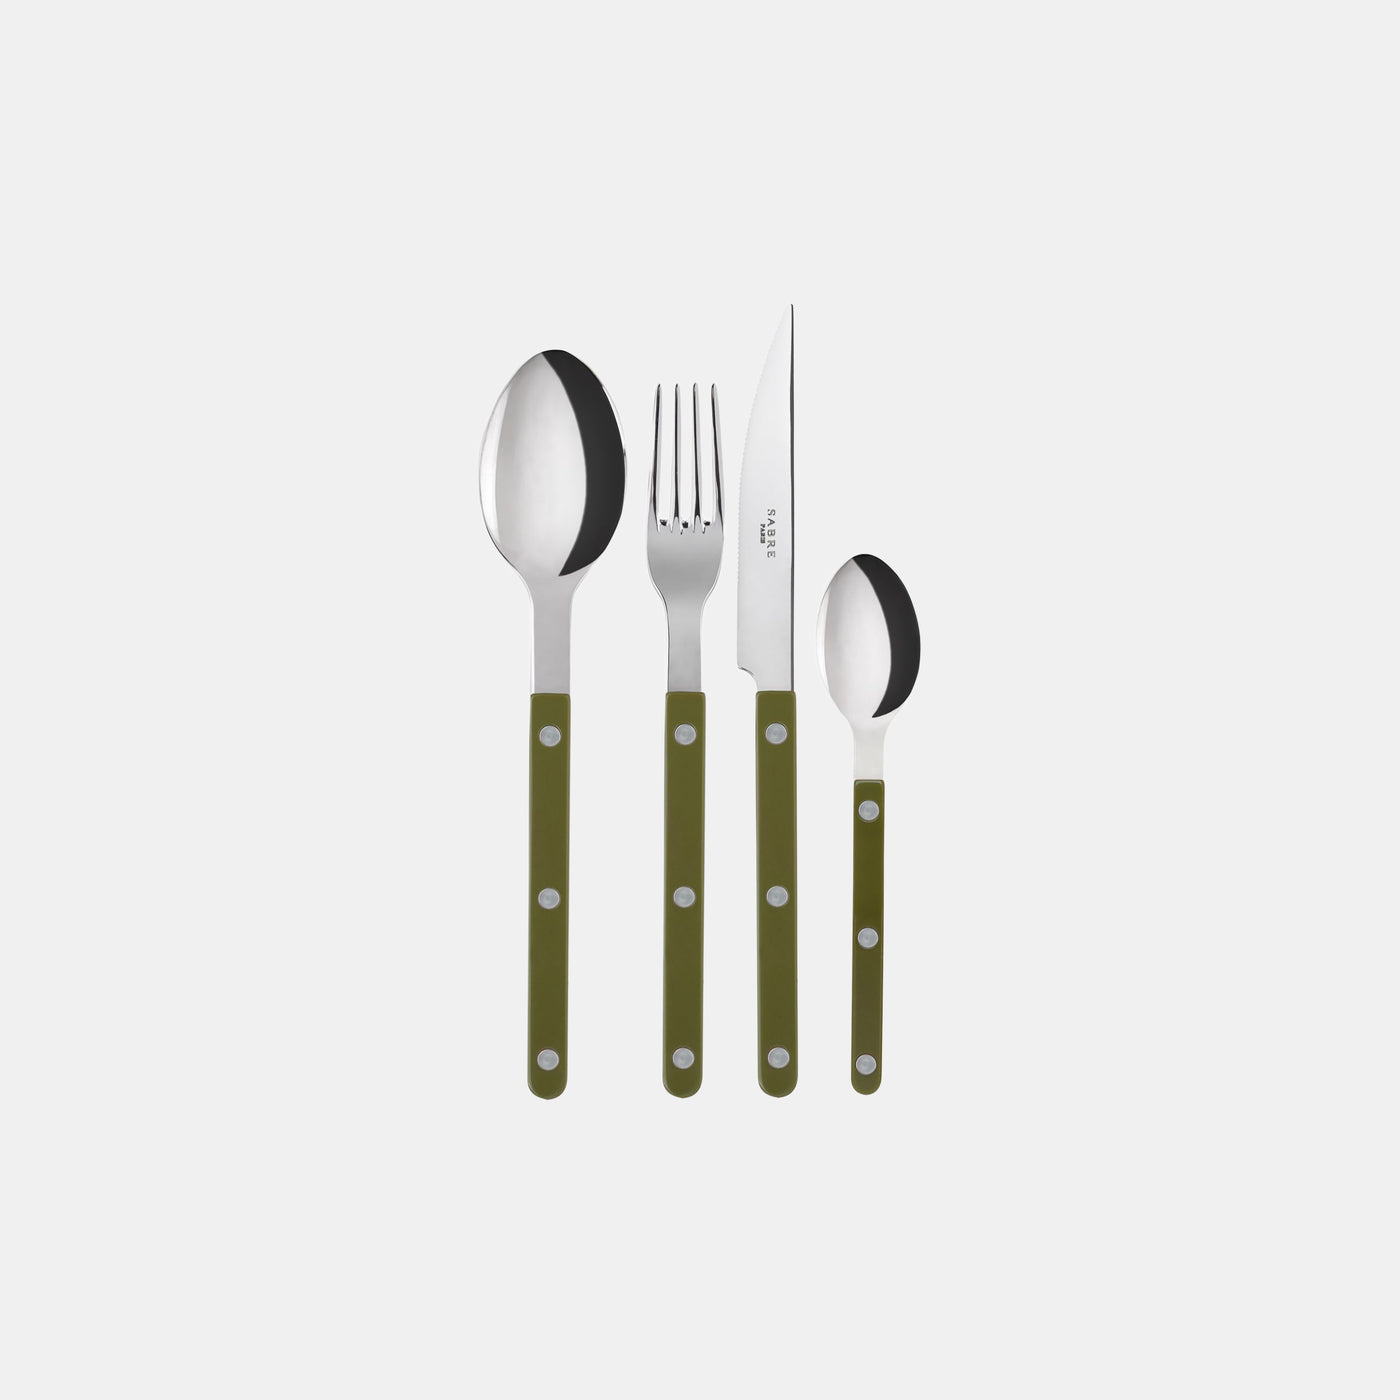 Bistrot shiny solid 24 pieces set - Green fern